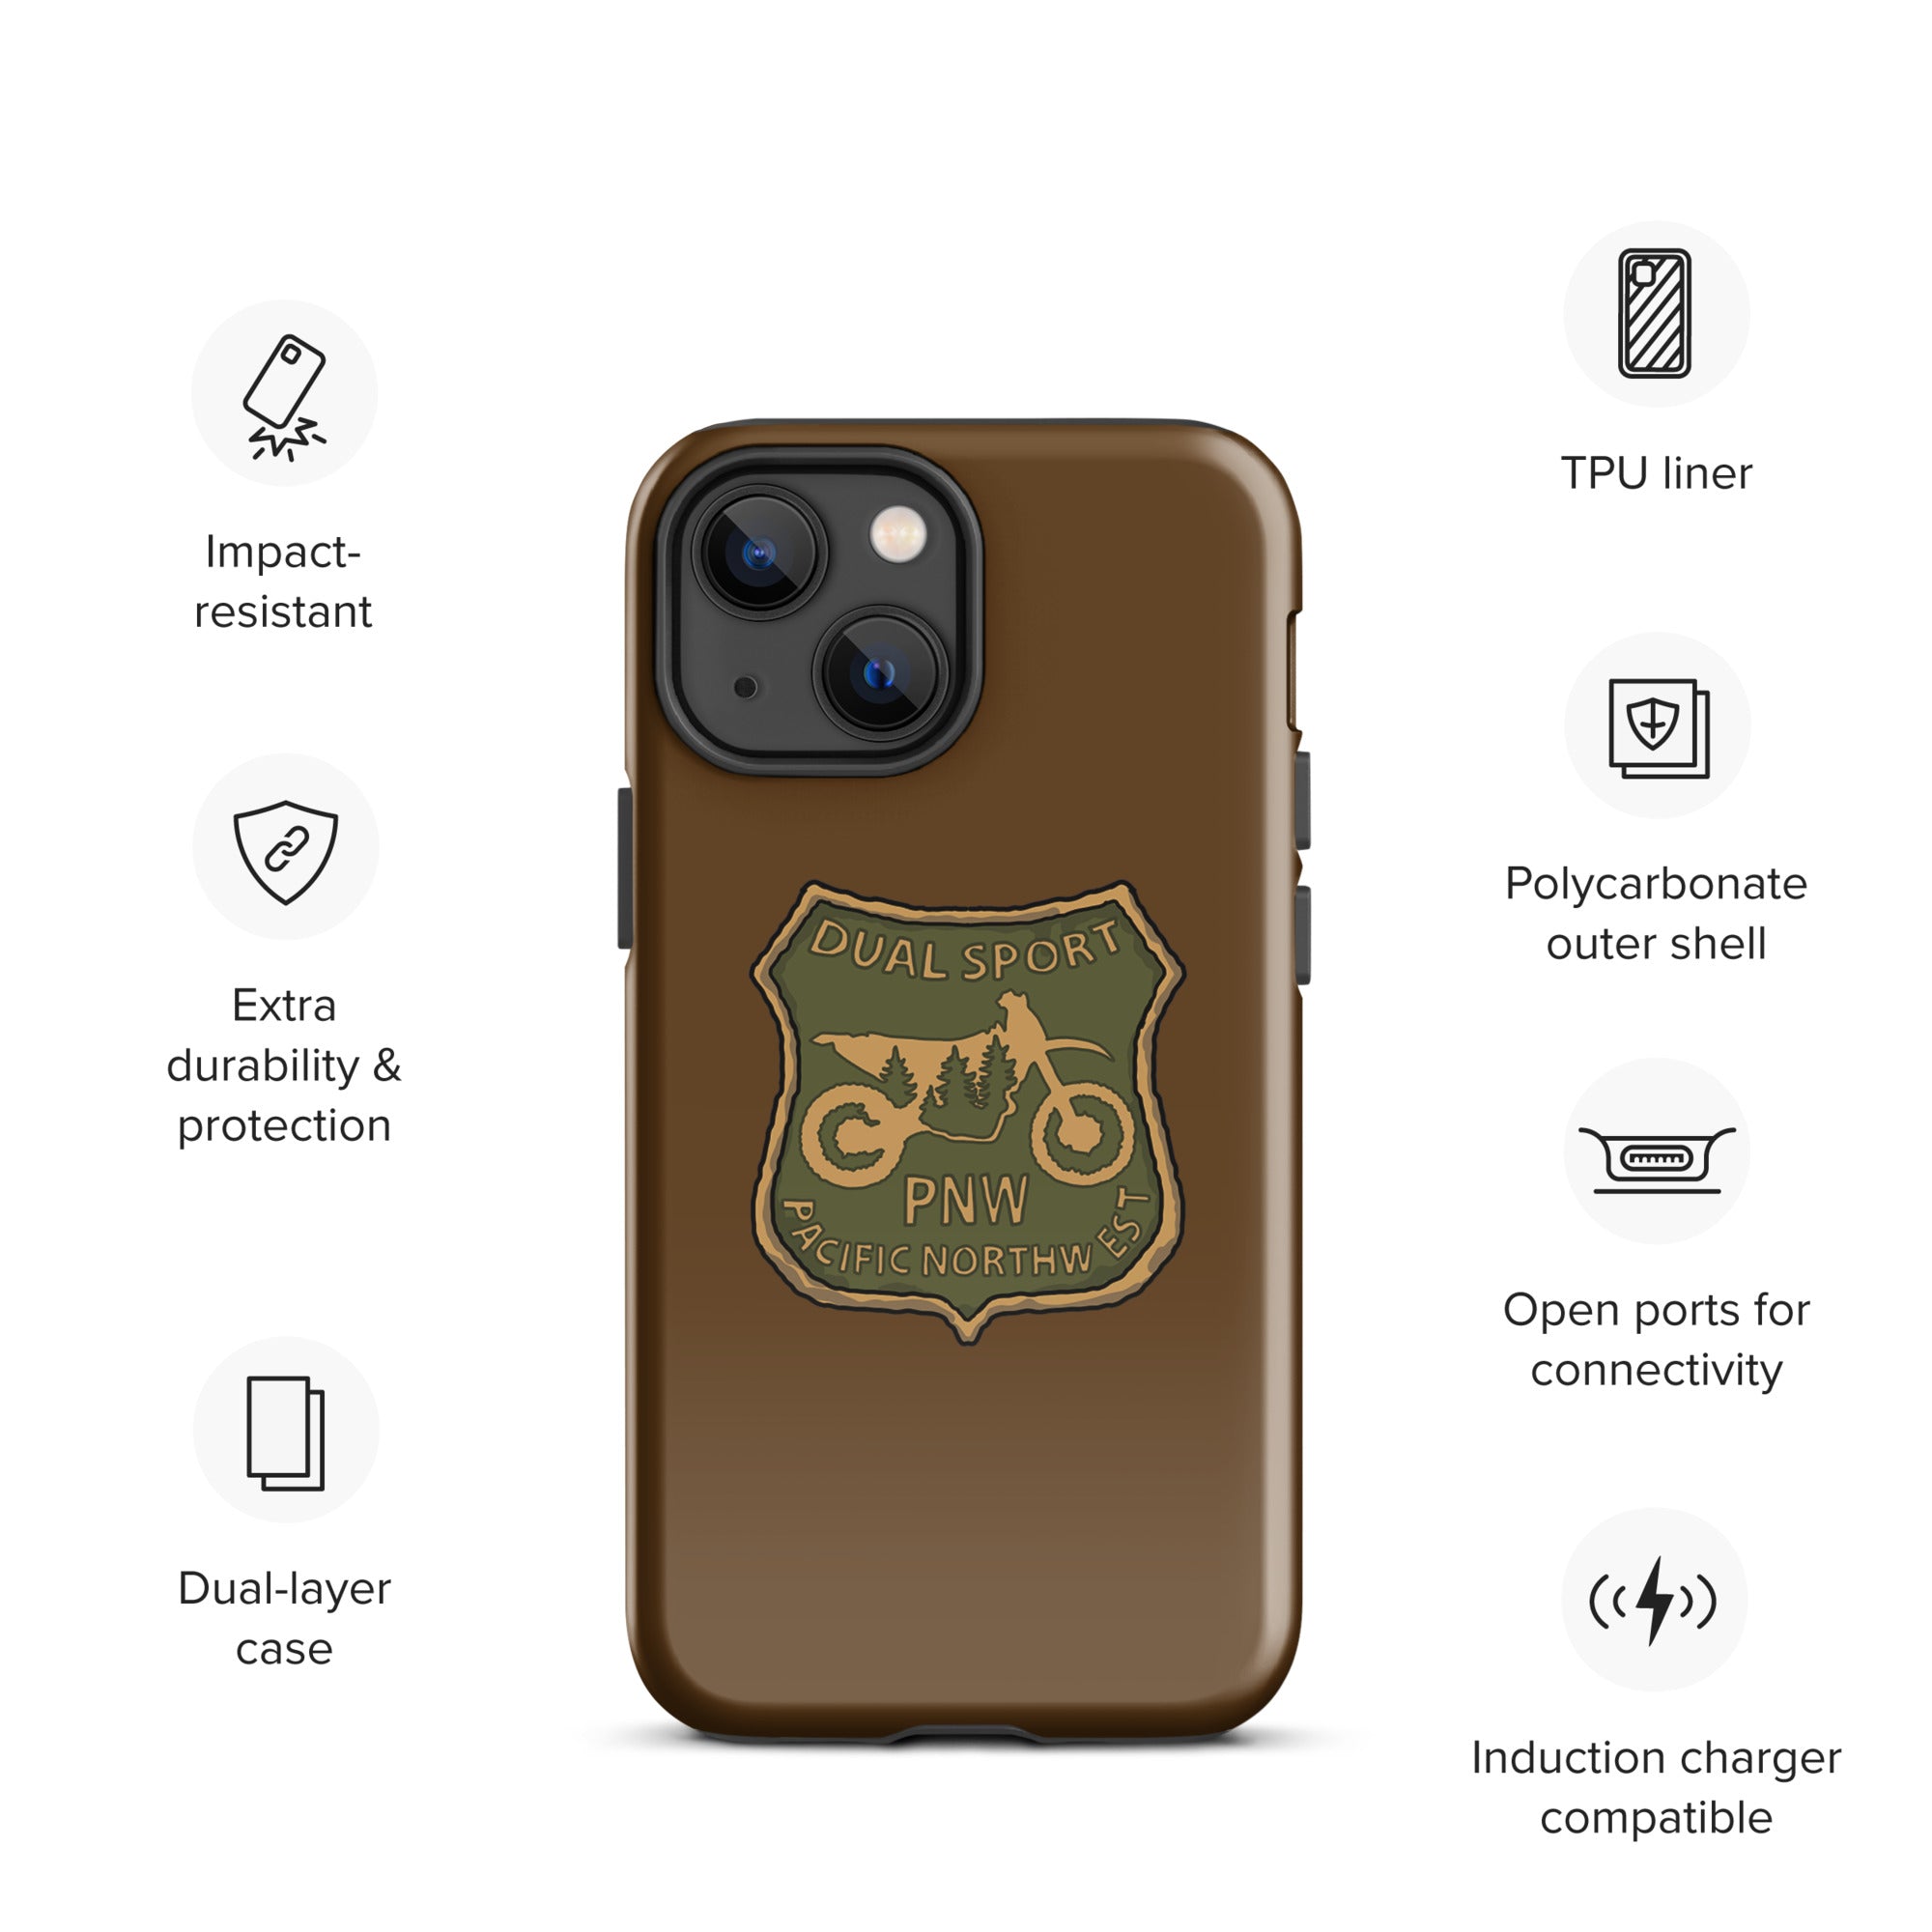 Sketchy Doodle Phone Case, Tough, iPhone, Brown